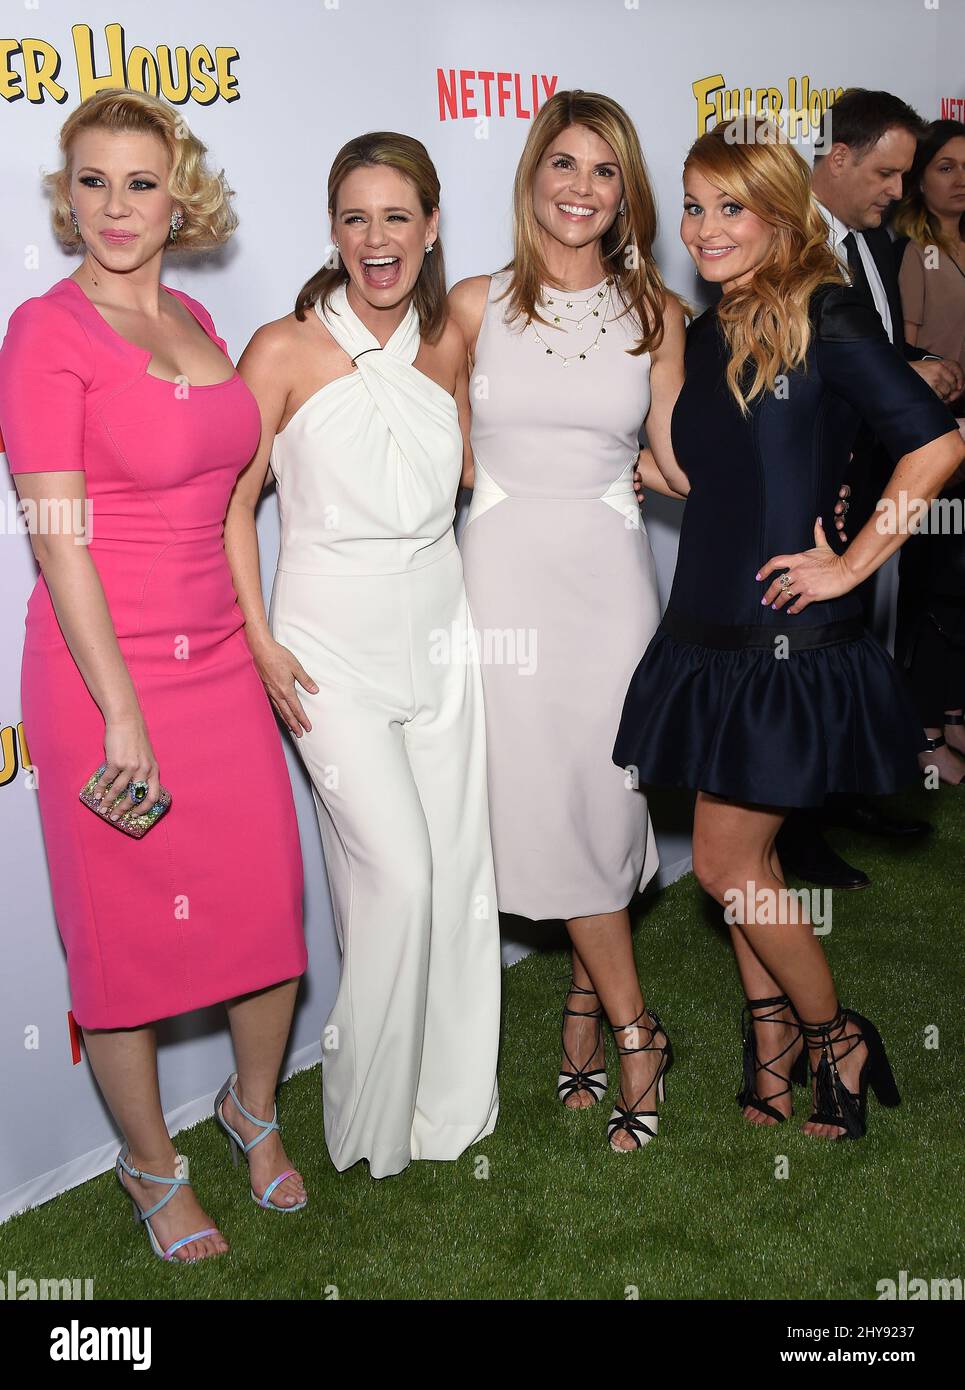 Candace Cameron Bure, Lori Loughlin, Jodie Sweetin & Andrea Barb attending the Nextflix 'The Fuller House' premiere held at The Grove, Pacific Theatres, Los Angeles, Ca, February 16, 2016. Stock Photo